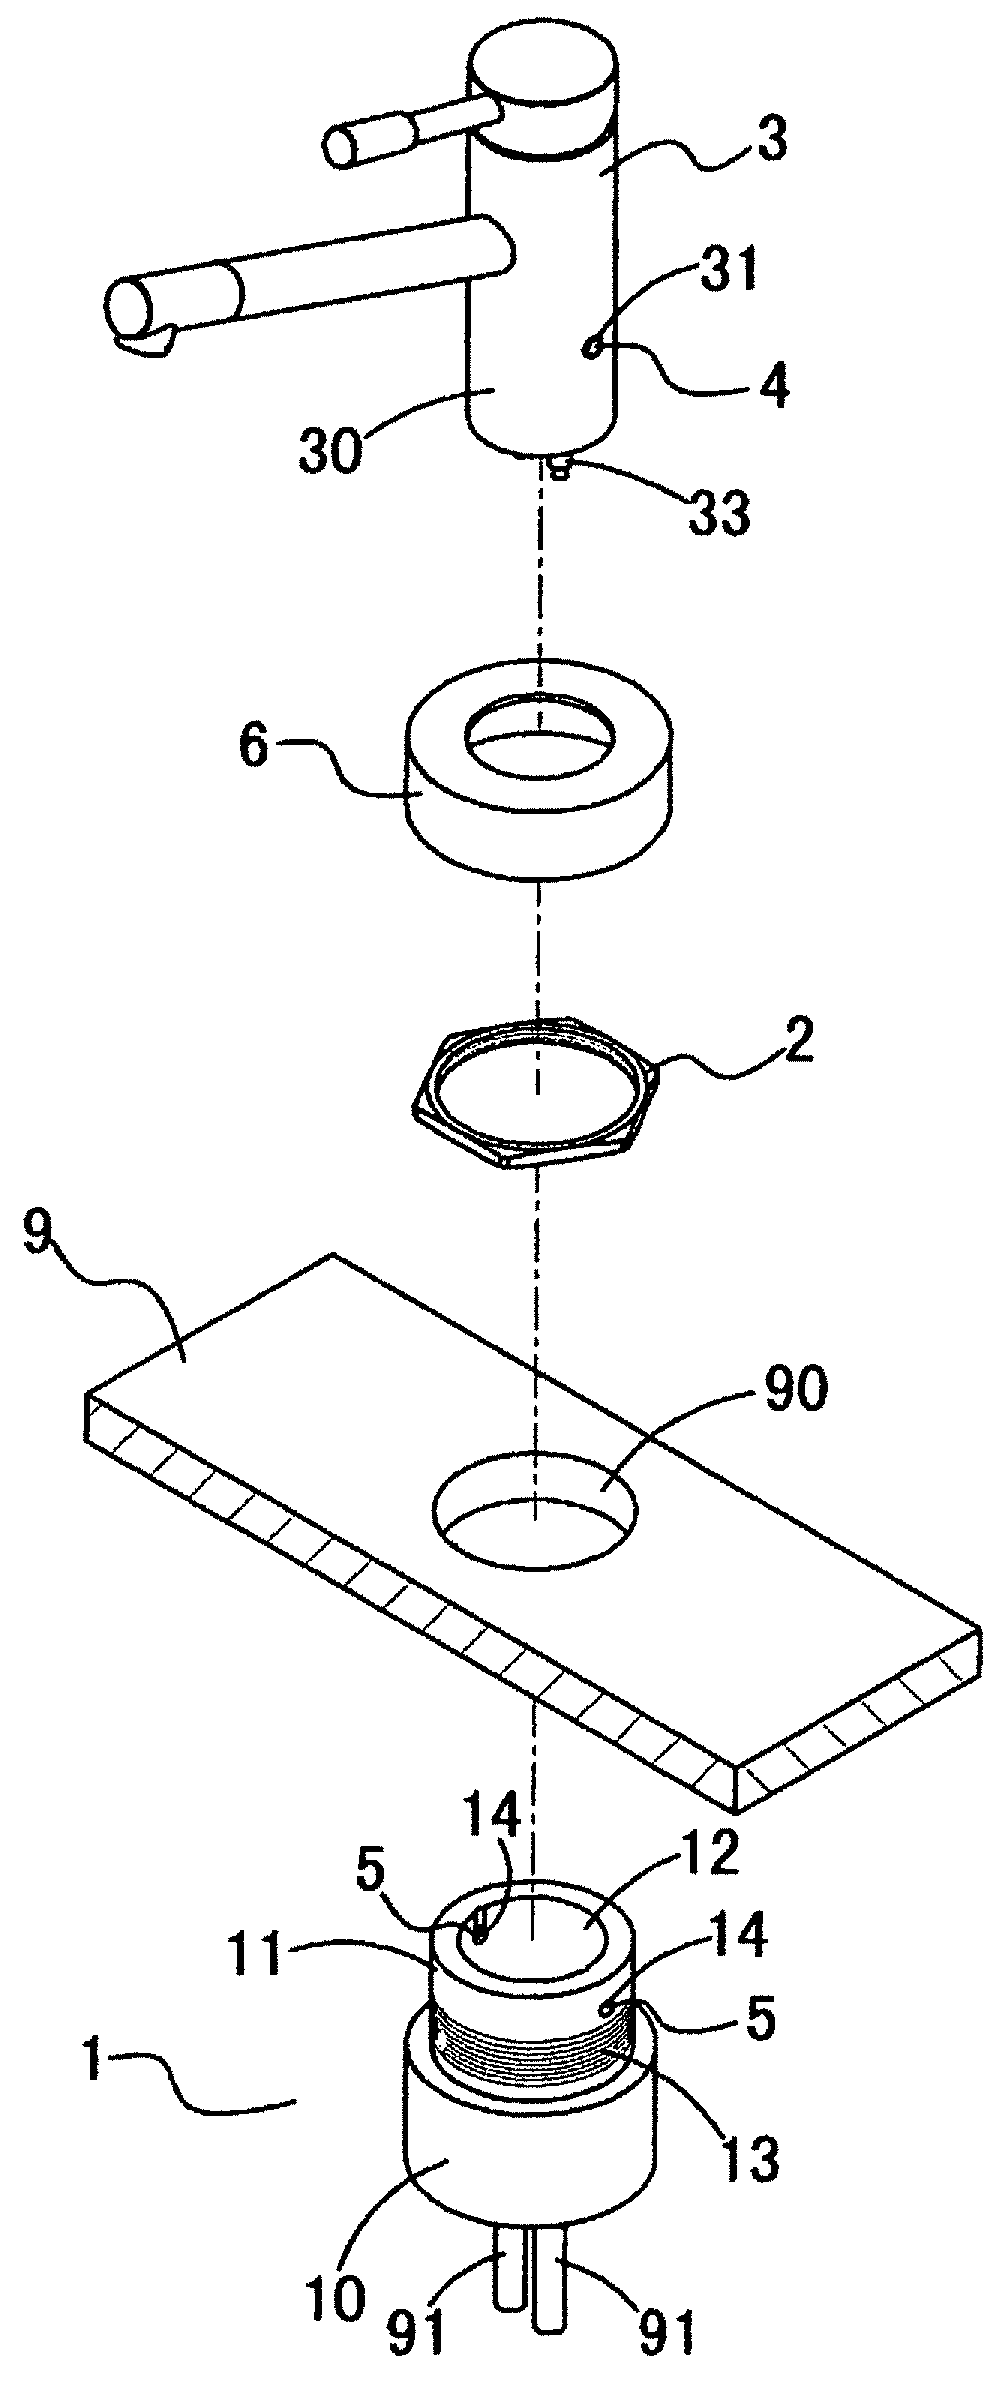 Installation structure of countertop faucet